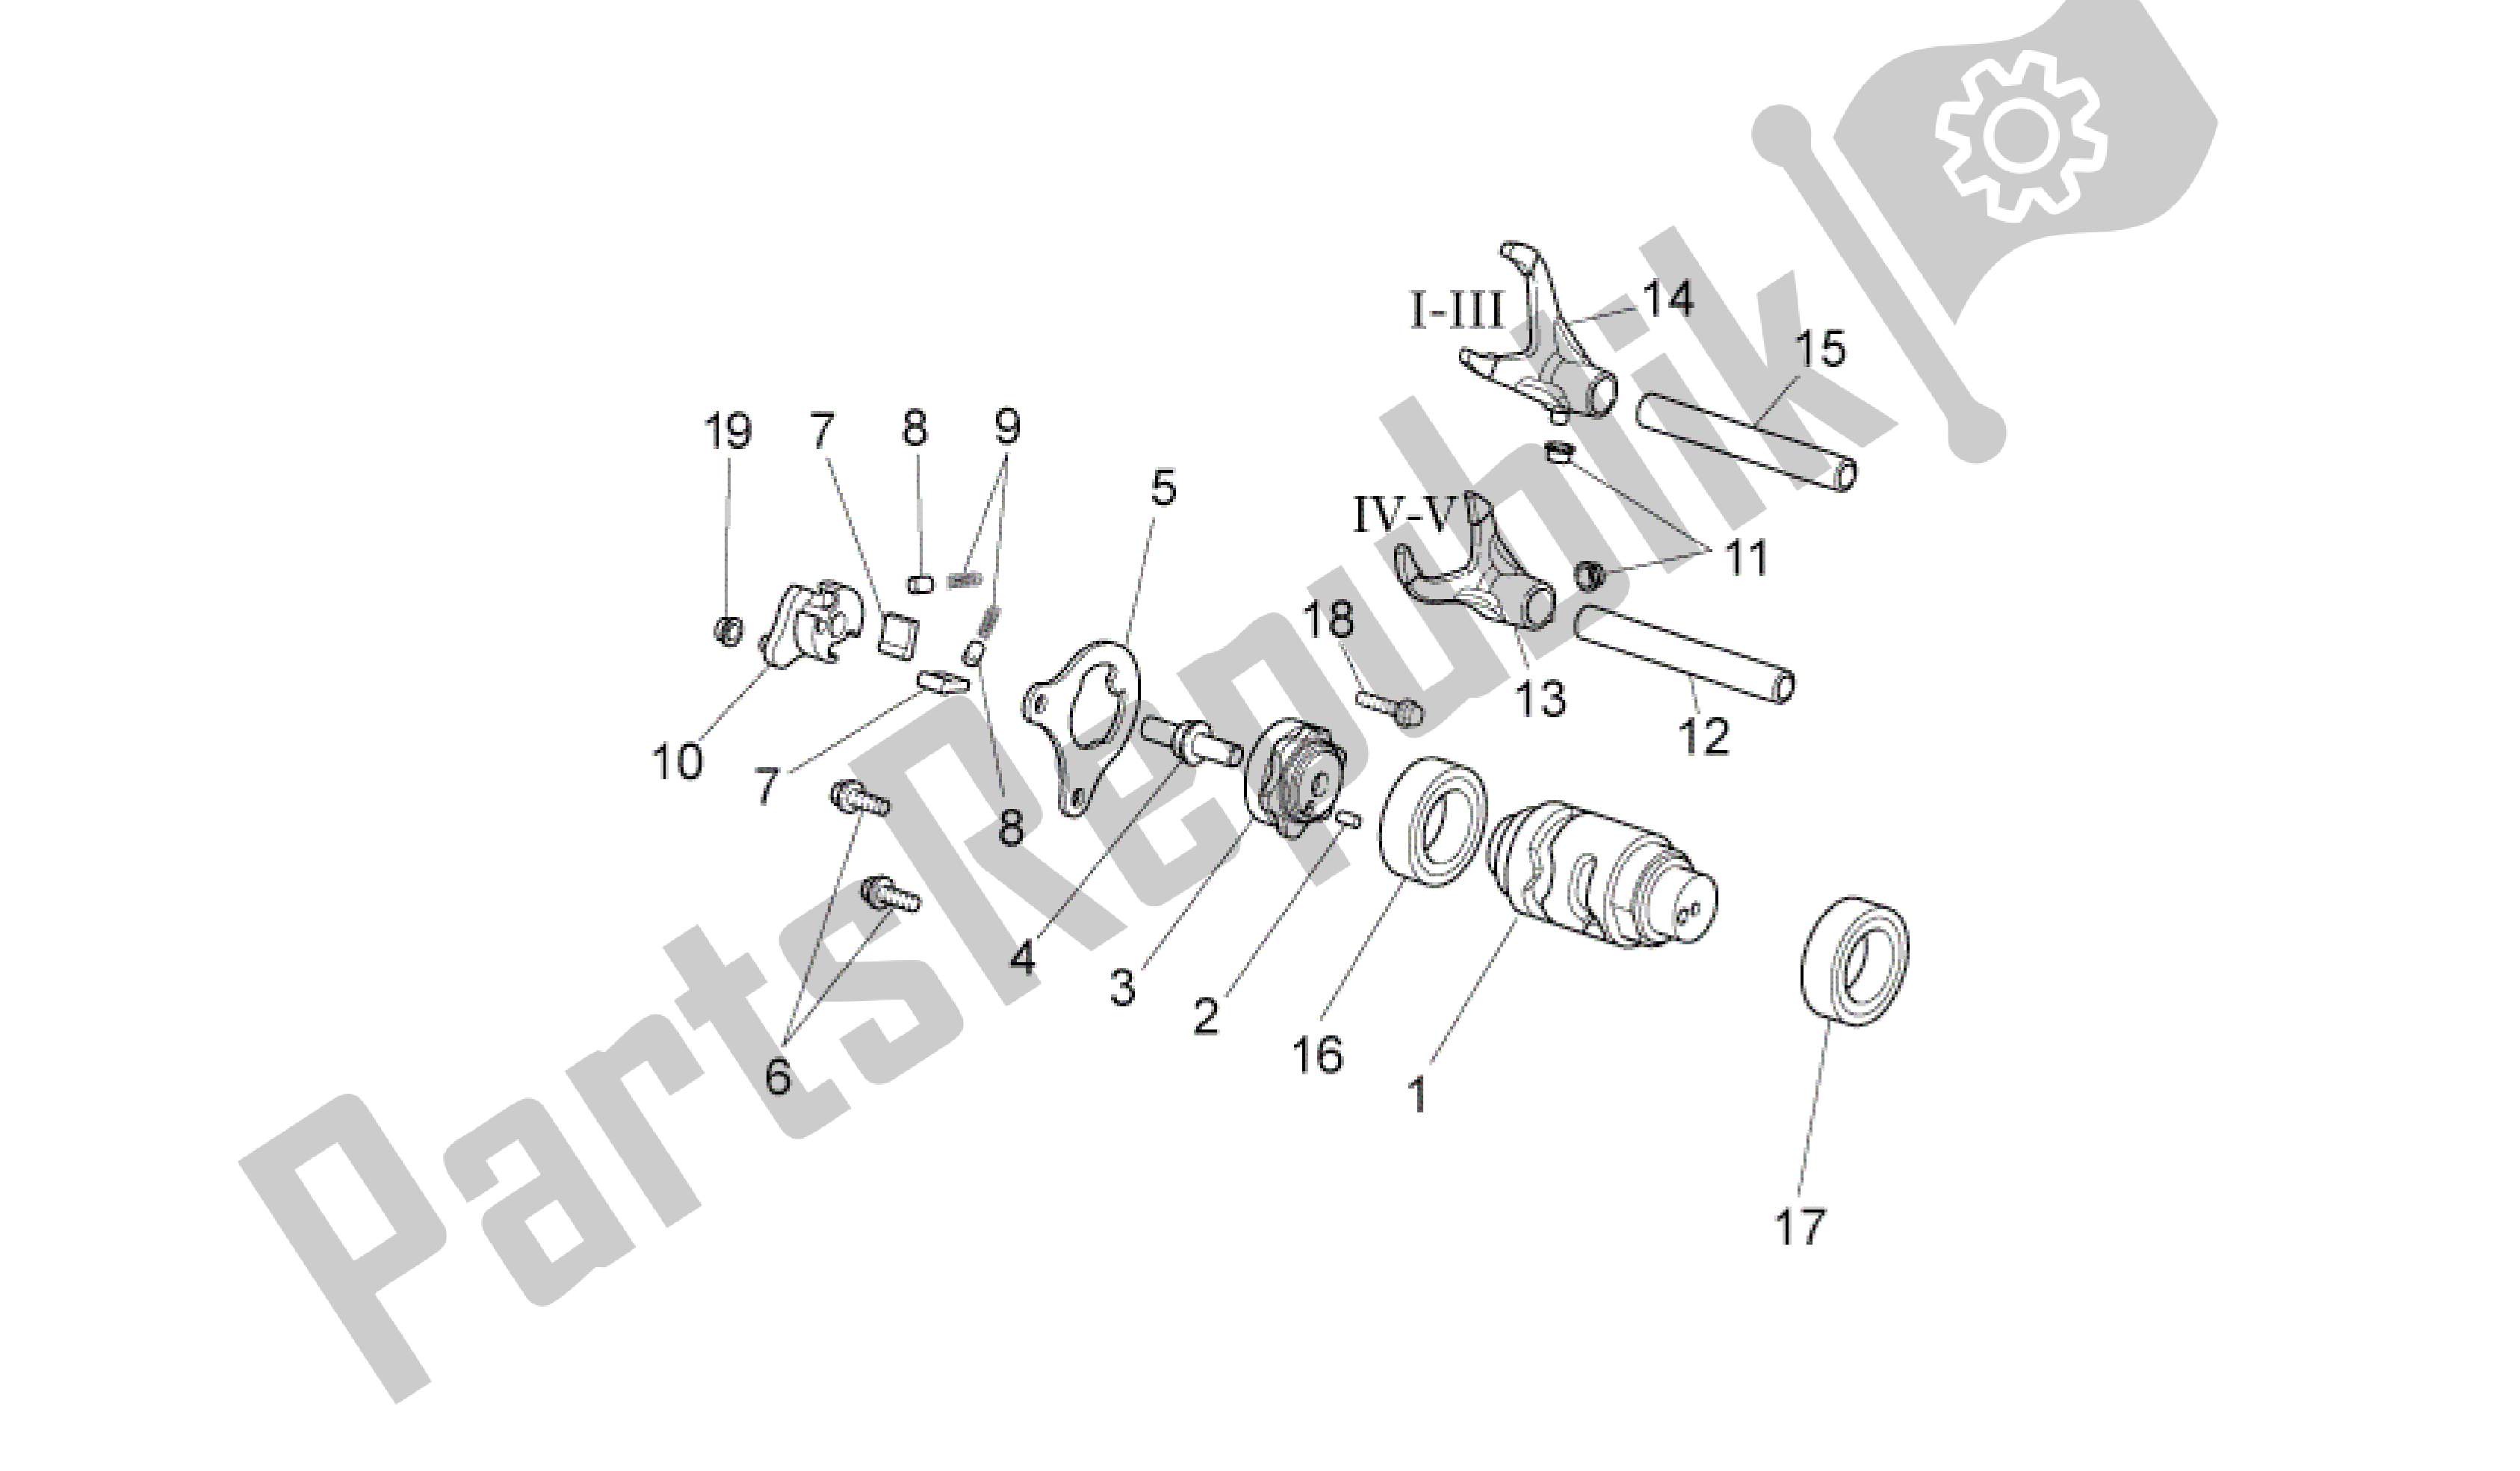 All parts for the Gear Box Selector Ii of the Aprilia MXV 450 2008 - 2010